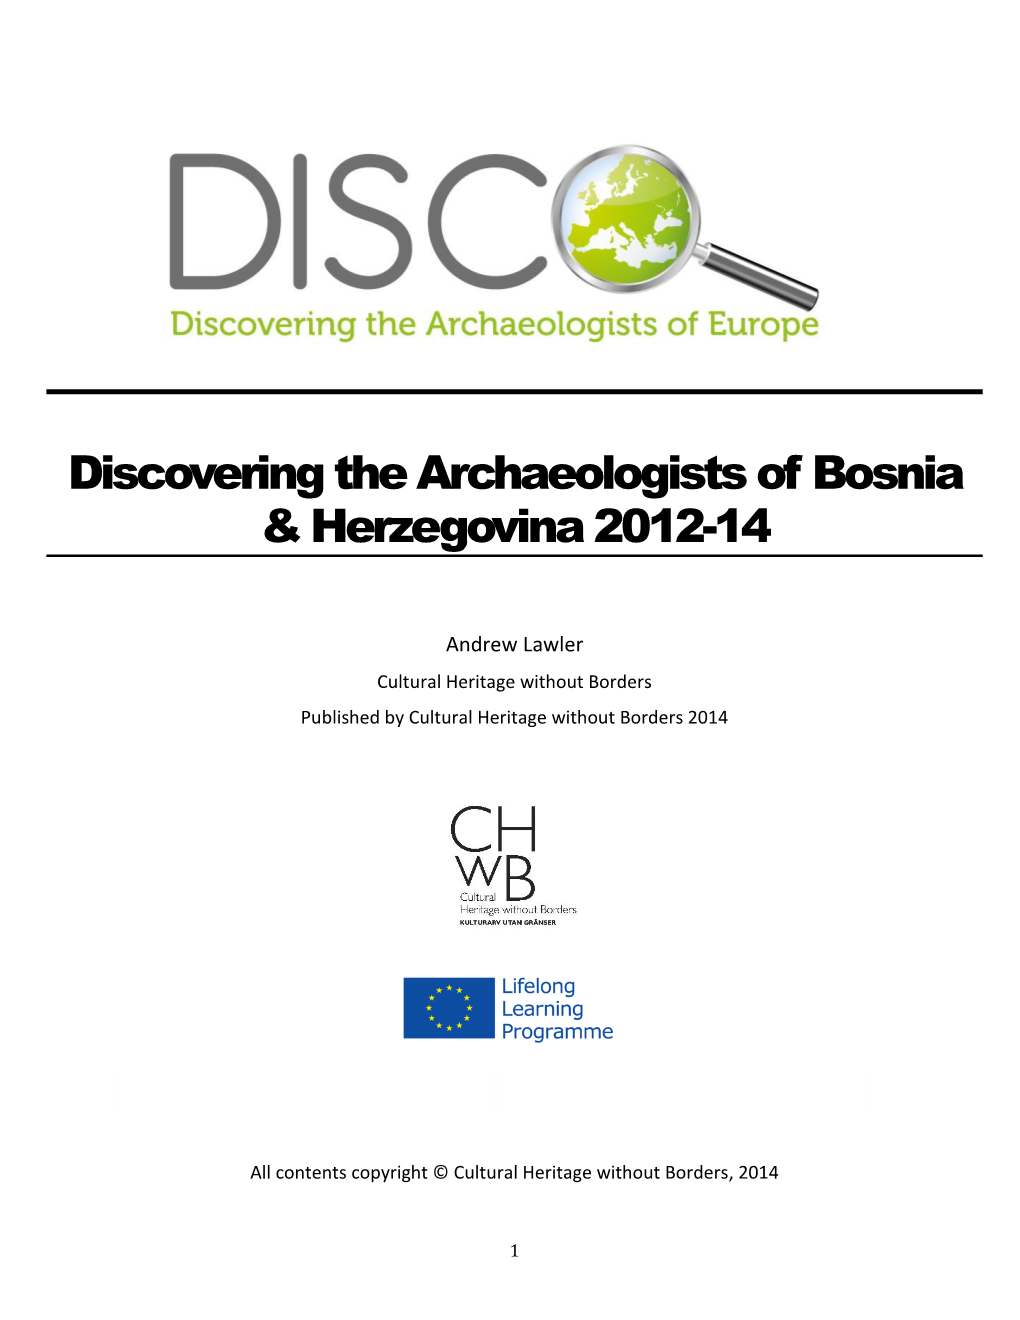 Discovering the Archaeologists of Bosnia & Herzegovina 2012-14